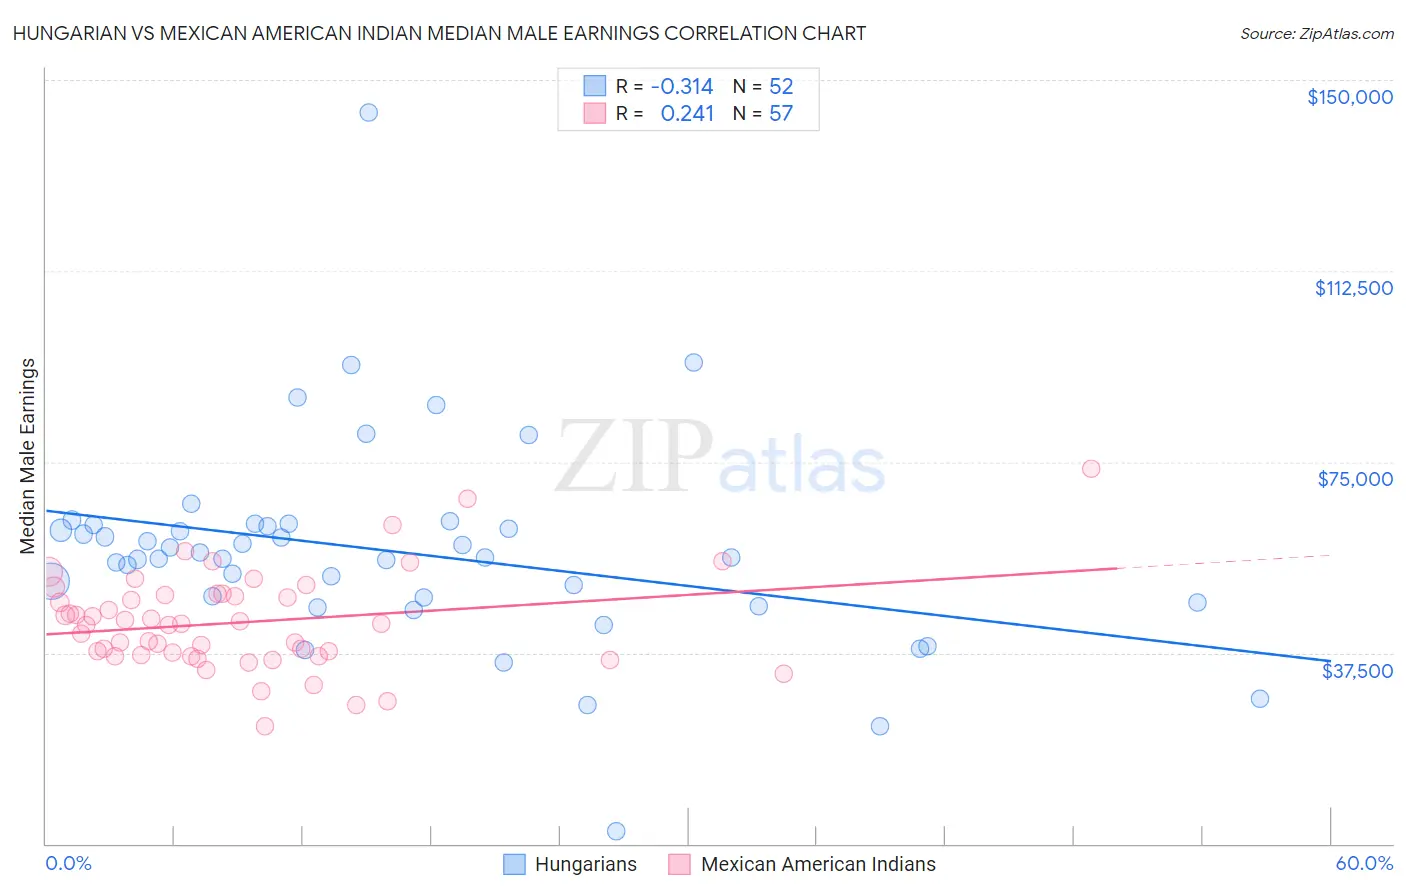 Hungarian vs Mexican American Indian Median Male Earnings